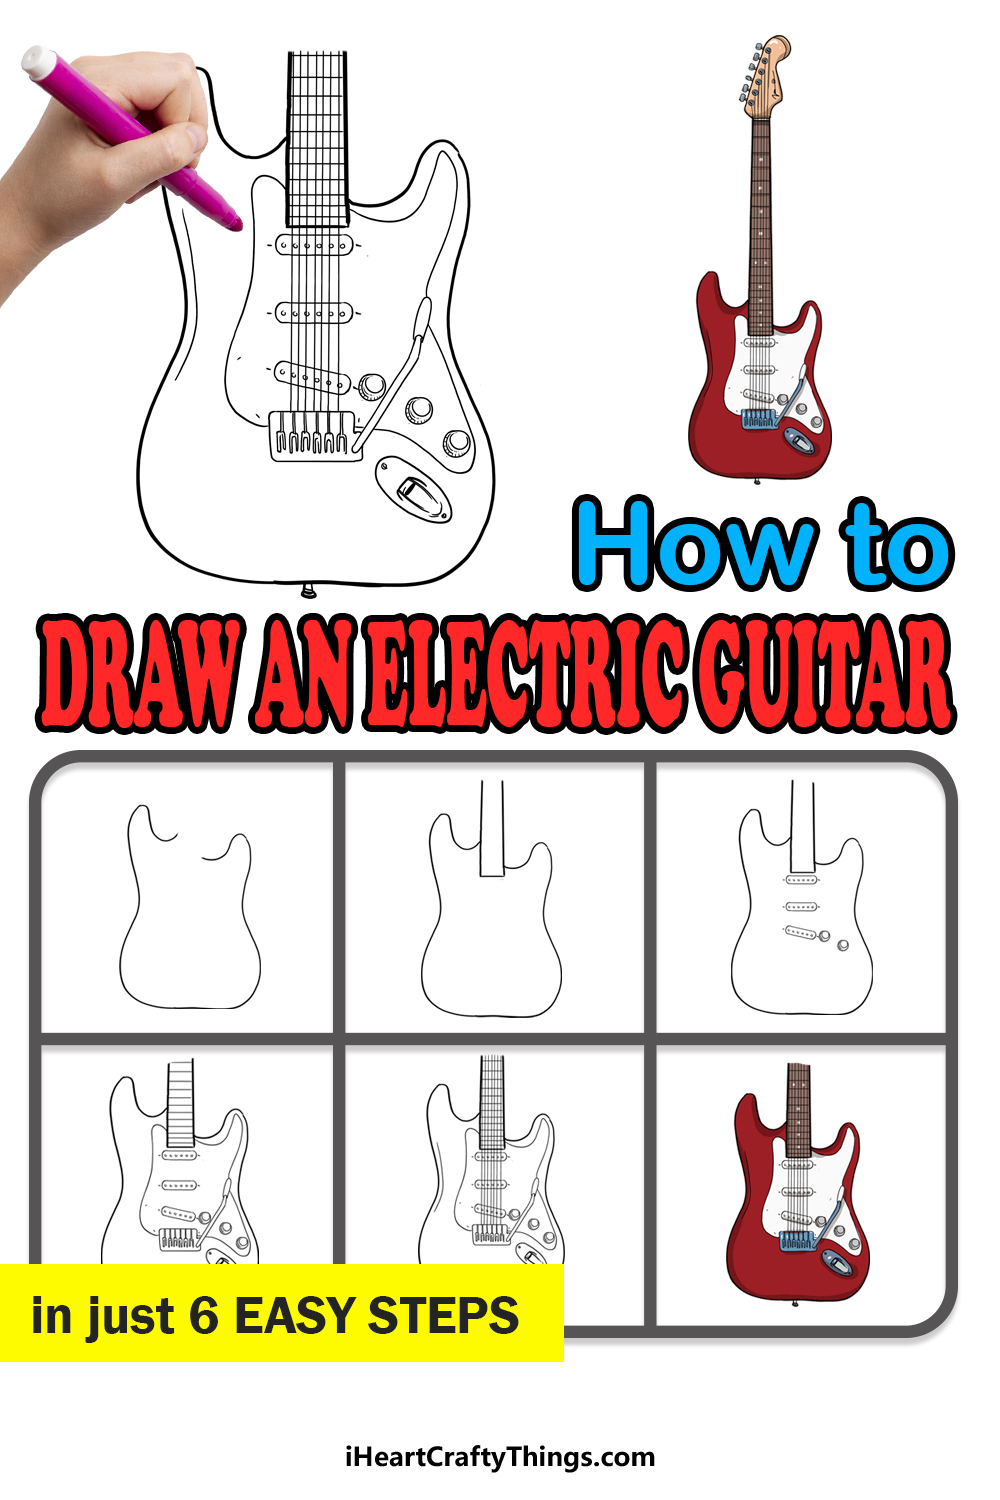 How to Draw An Electric Guitar step by step guide